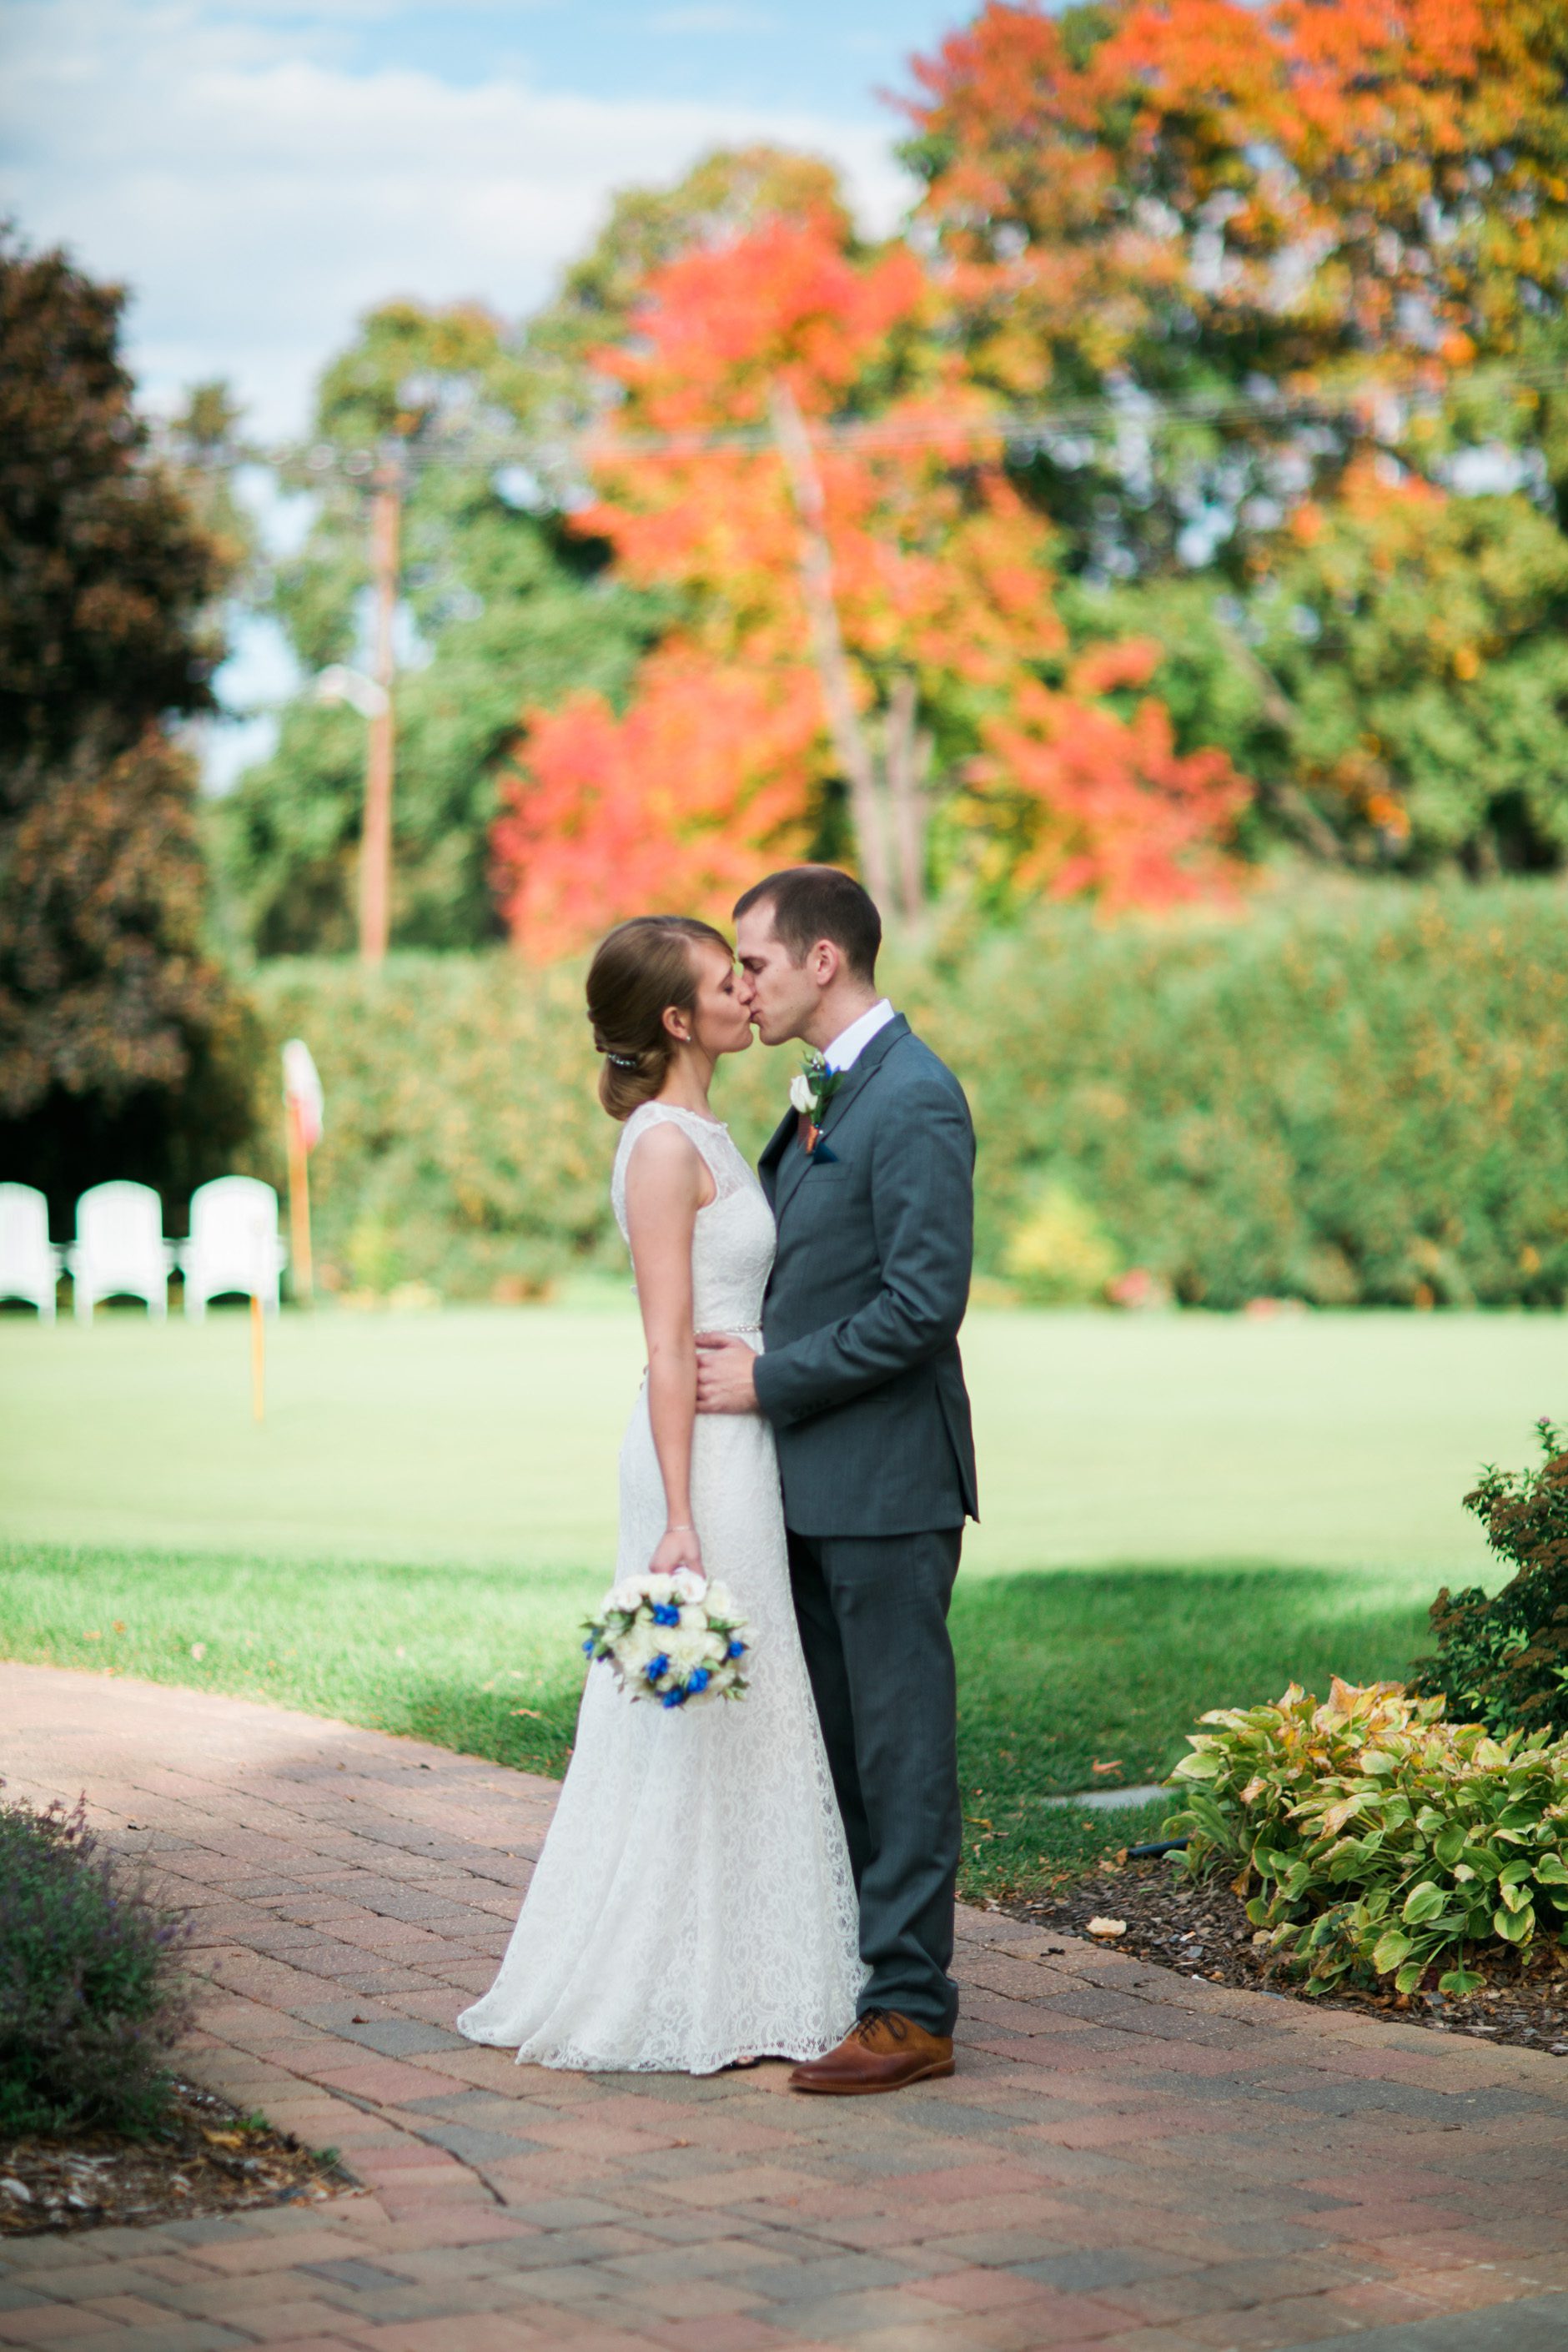 eileenkphoto-wedding-town-and-country-club-5275